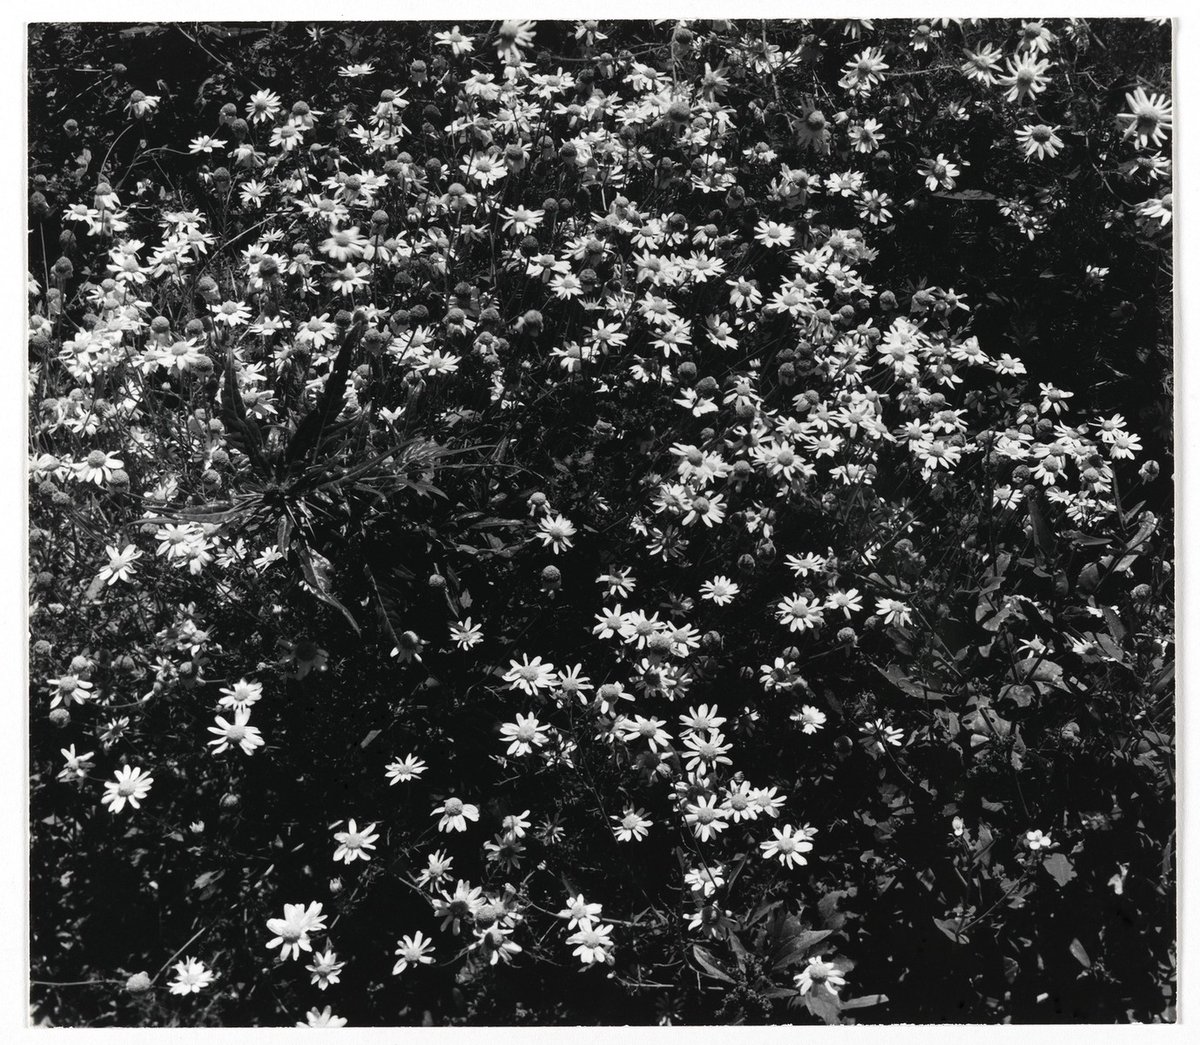 [Untitled] (Flowers) brooklynmuseum.org/opencollection…